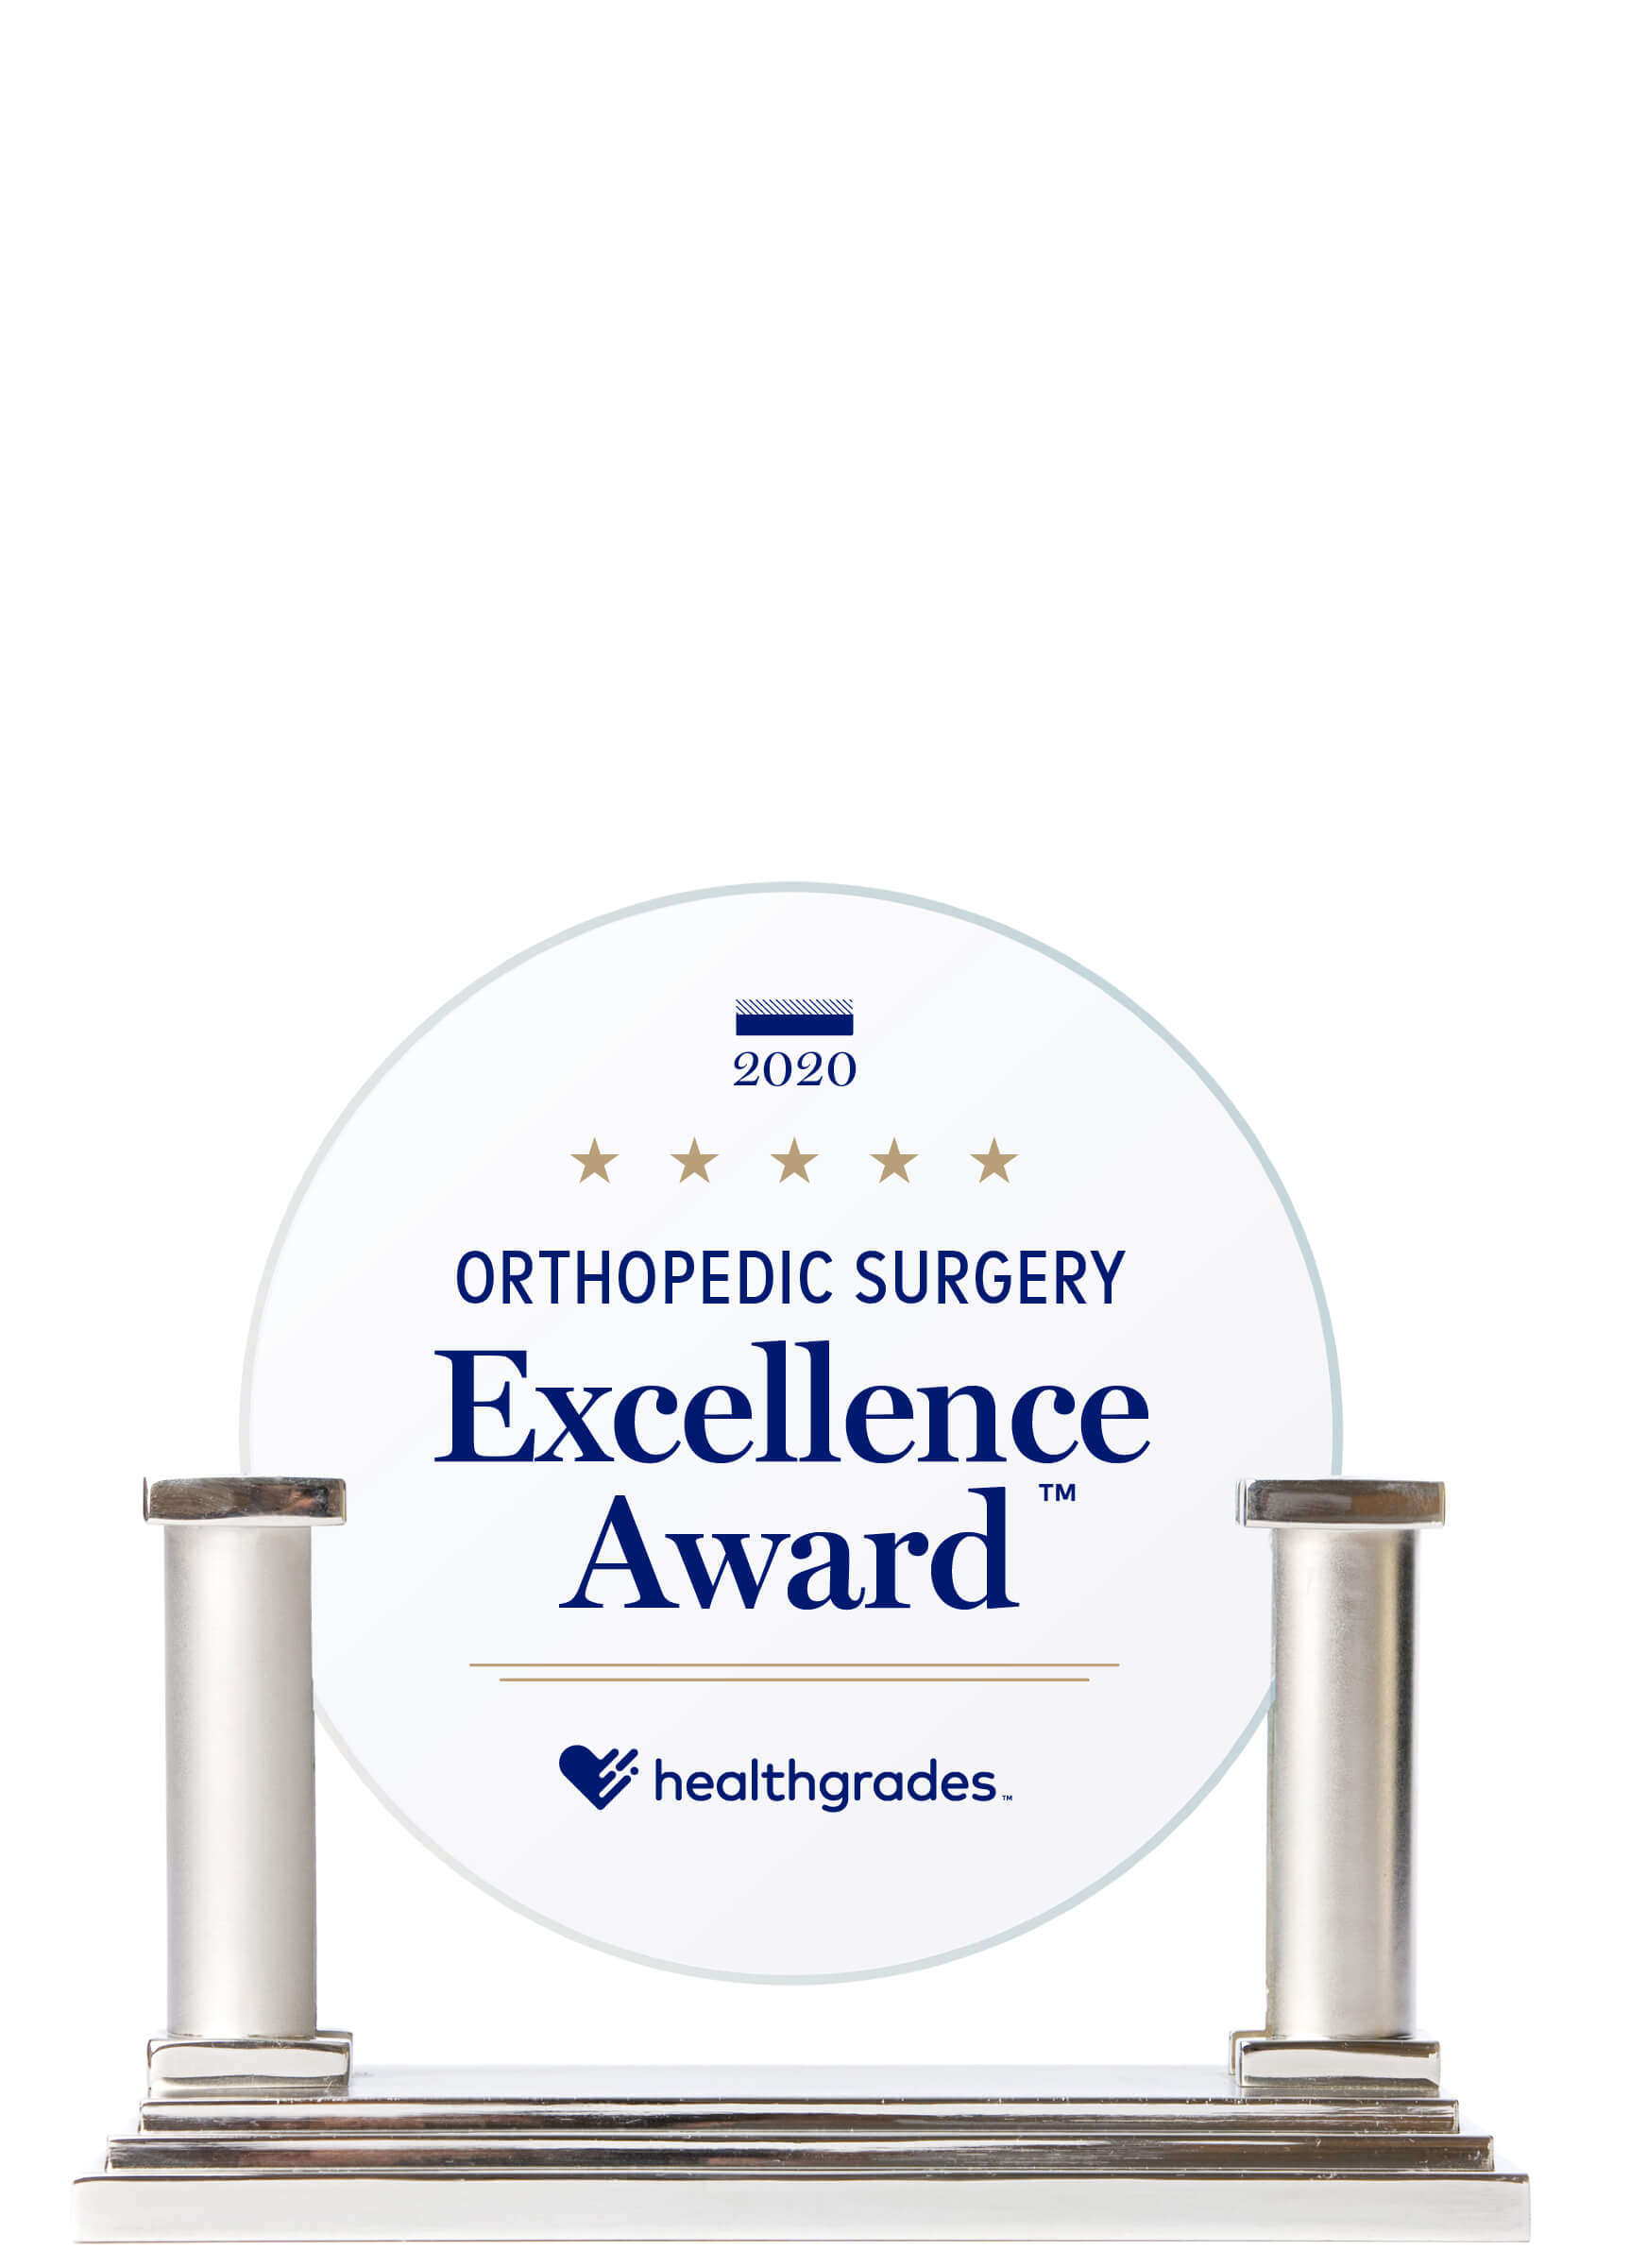 Healthgrades Excellence Award for Orthopedic Surgery Trophy 2020